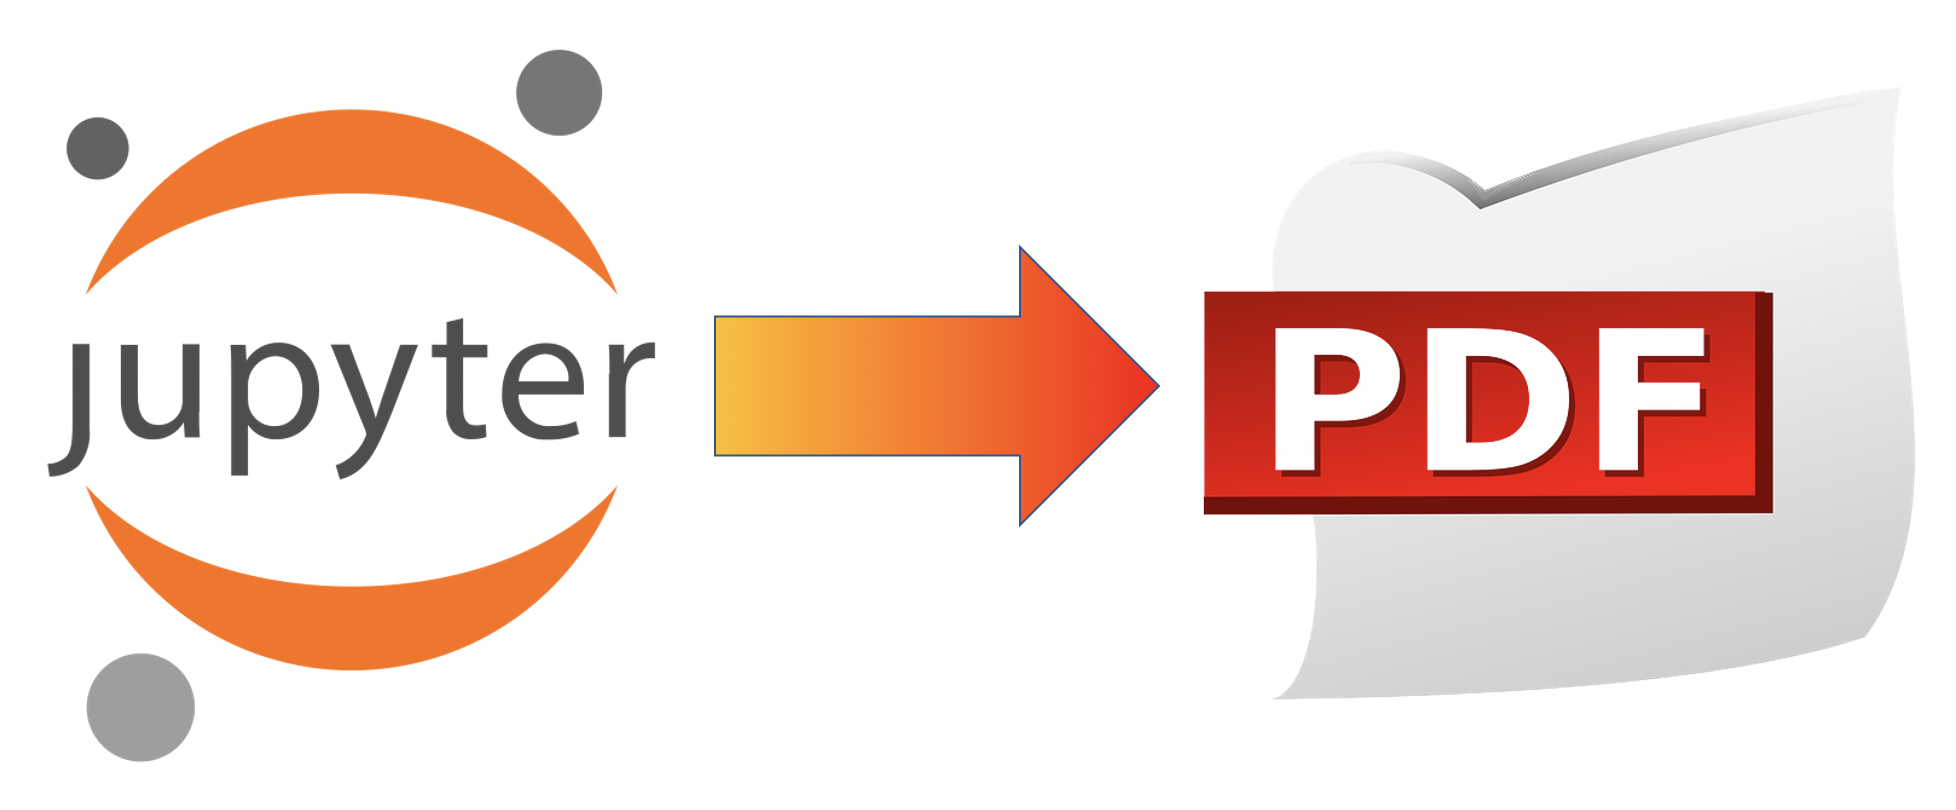 Image Showing Icons for converting from Jupyter to PDF files